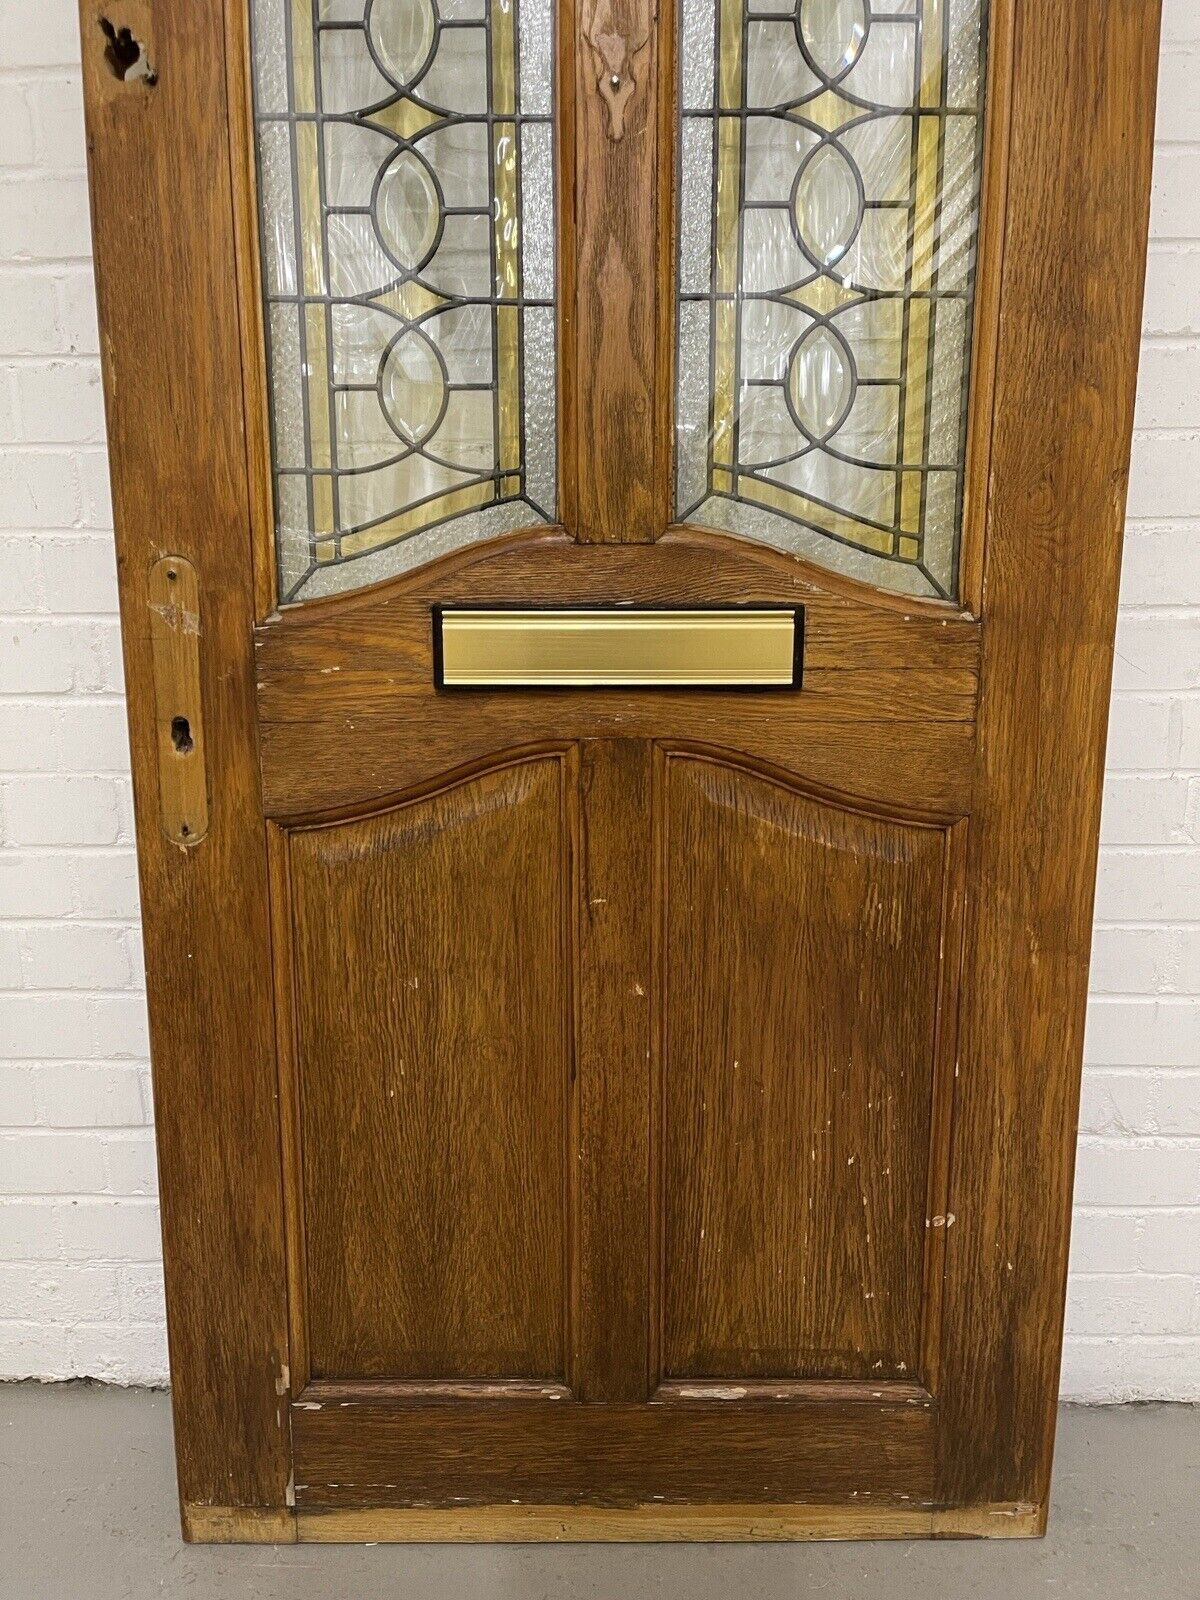 Reclaimed Style Edwardian Modern Stained Glass Front Door 2010 or 2005 x 814mm